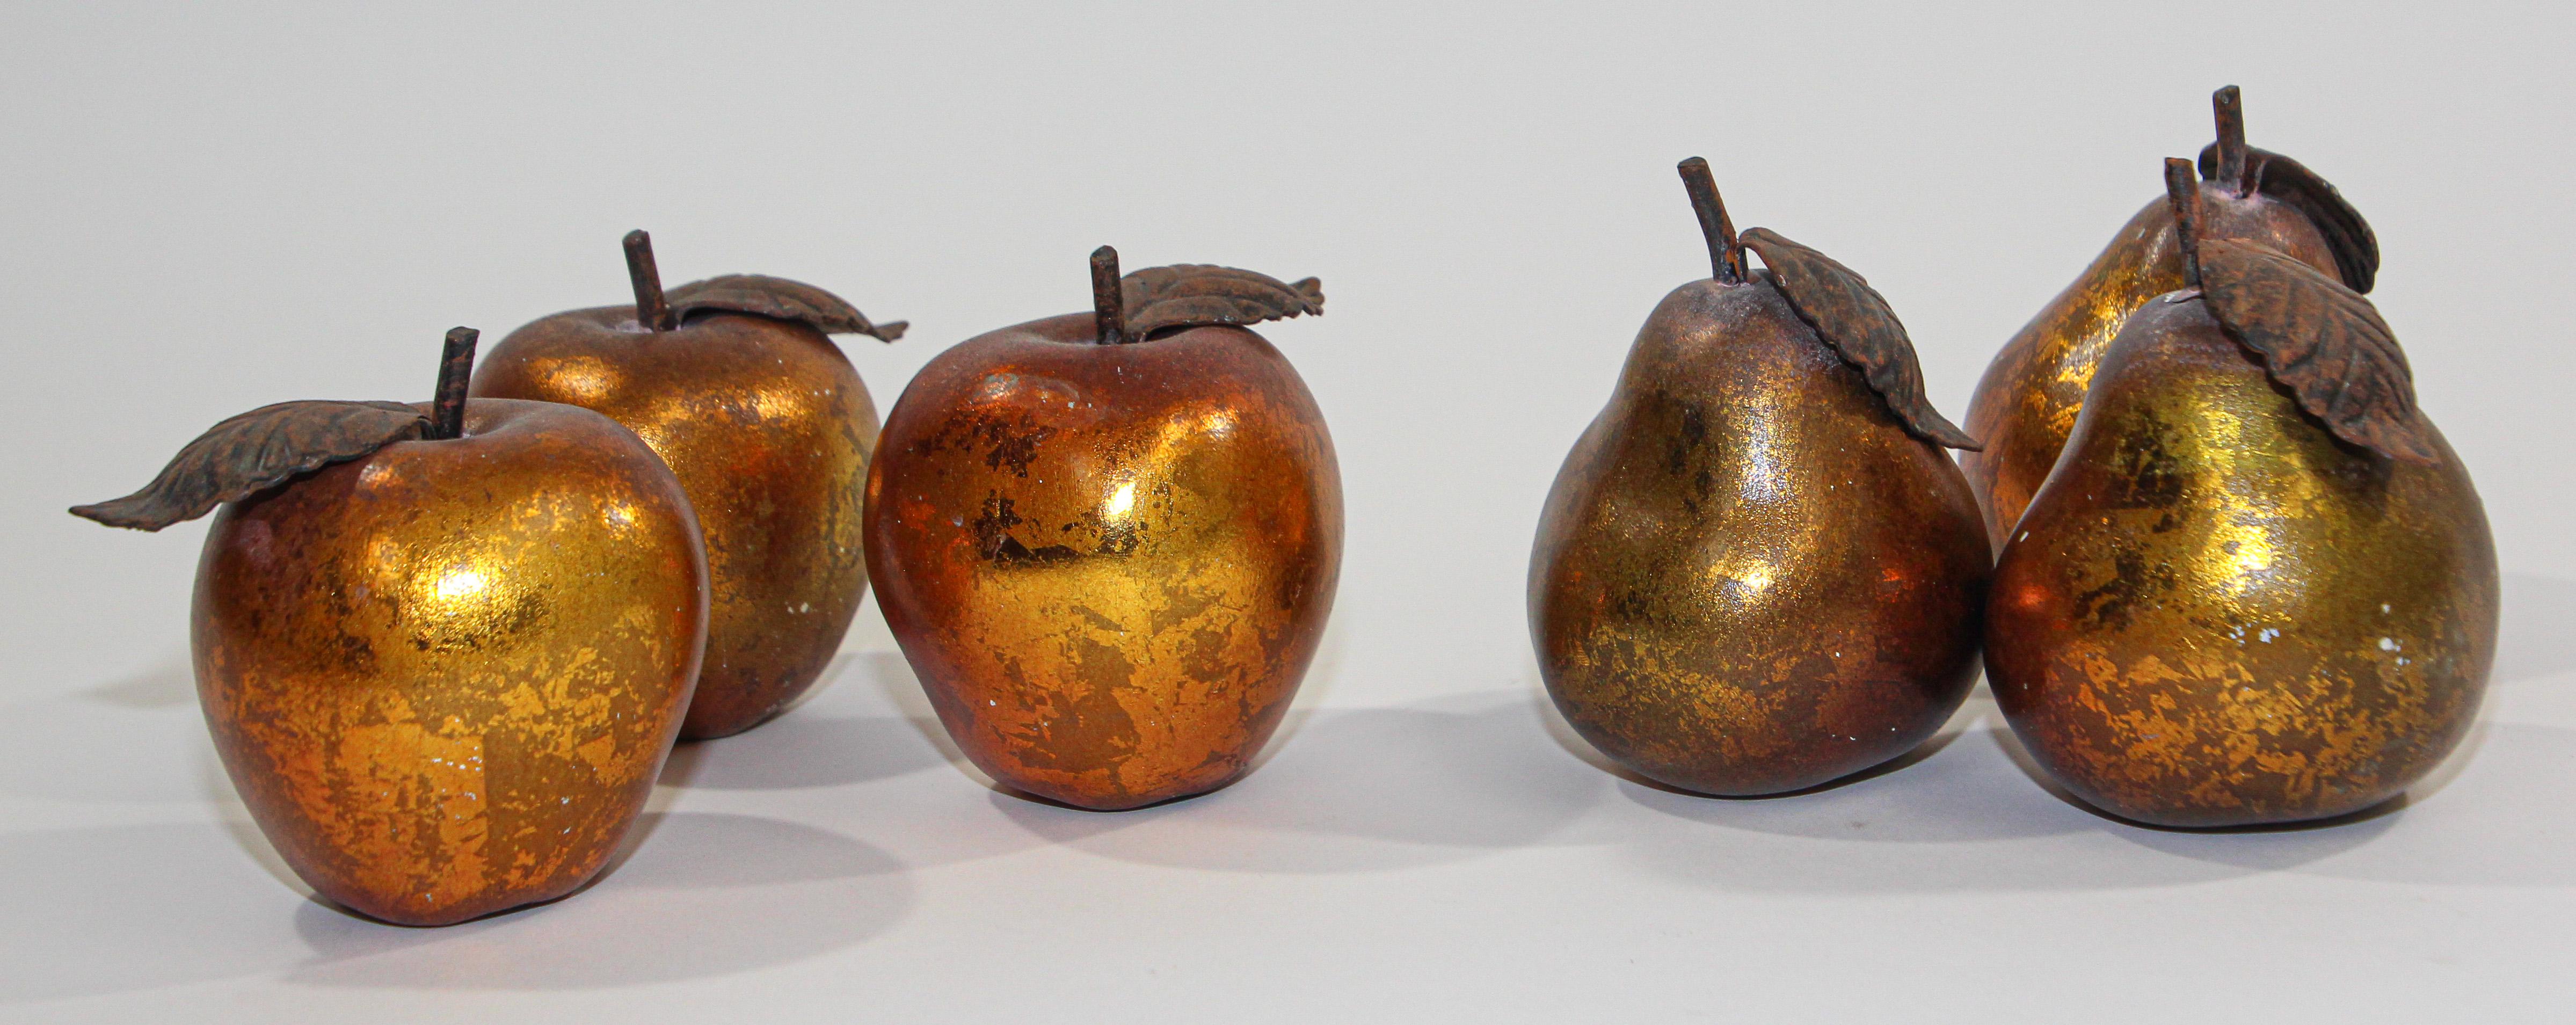 decorative apples and pears